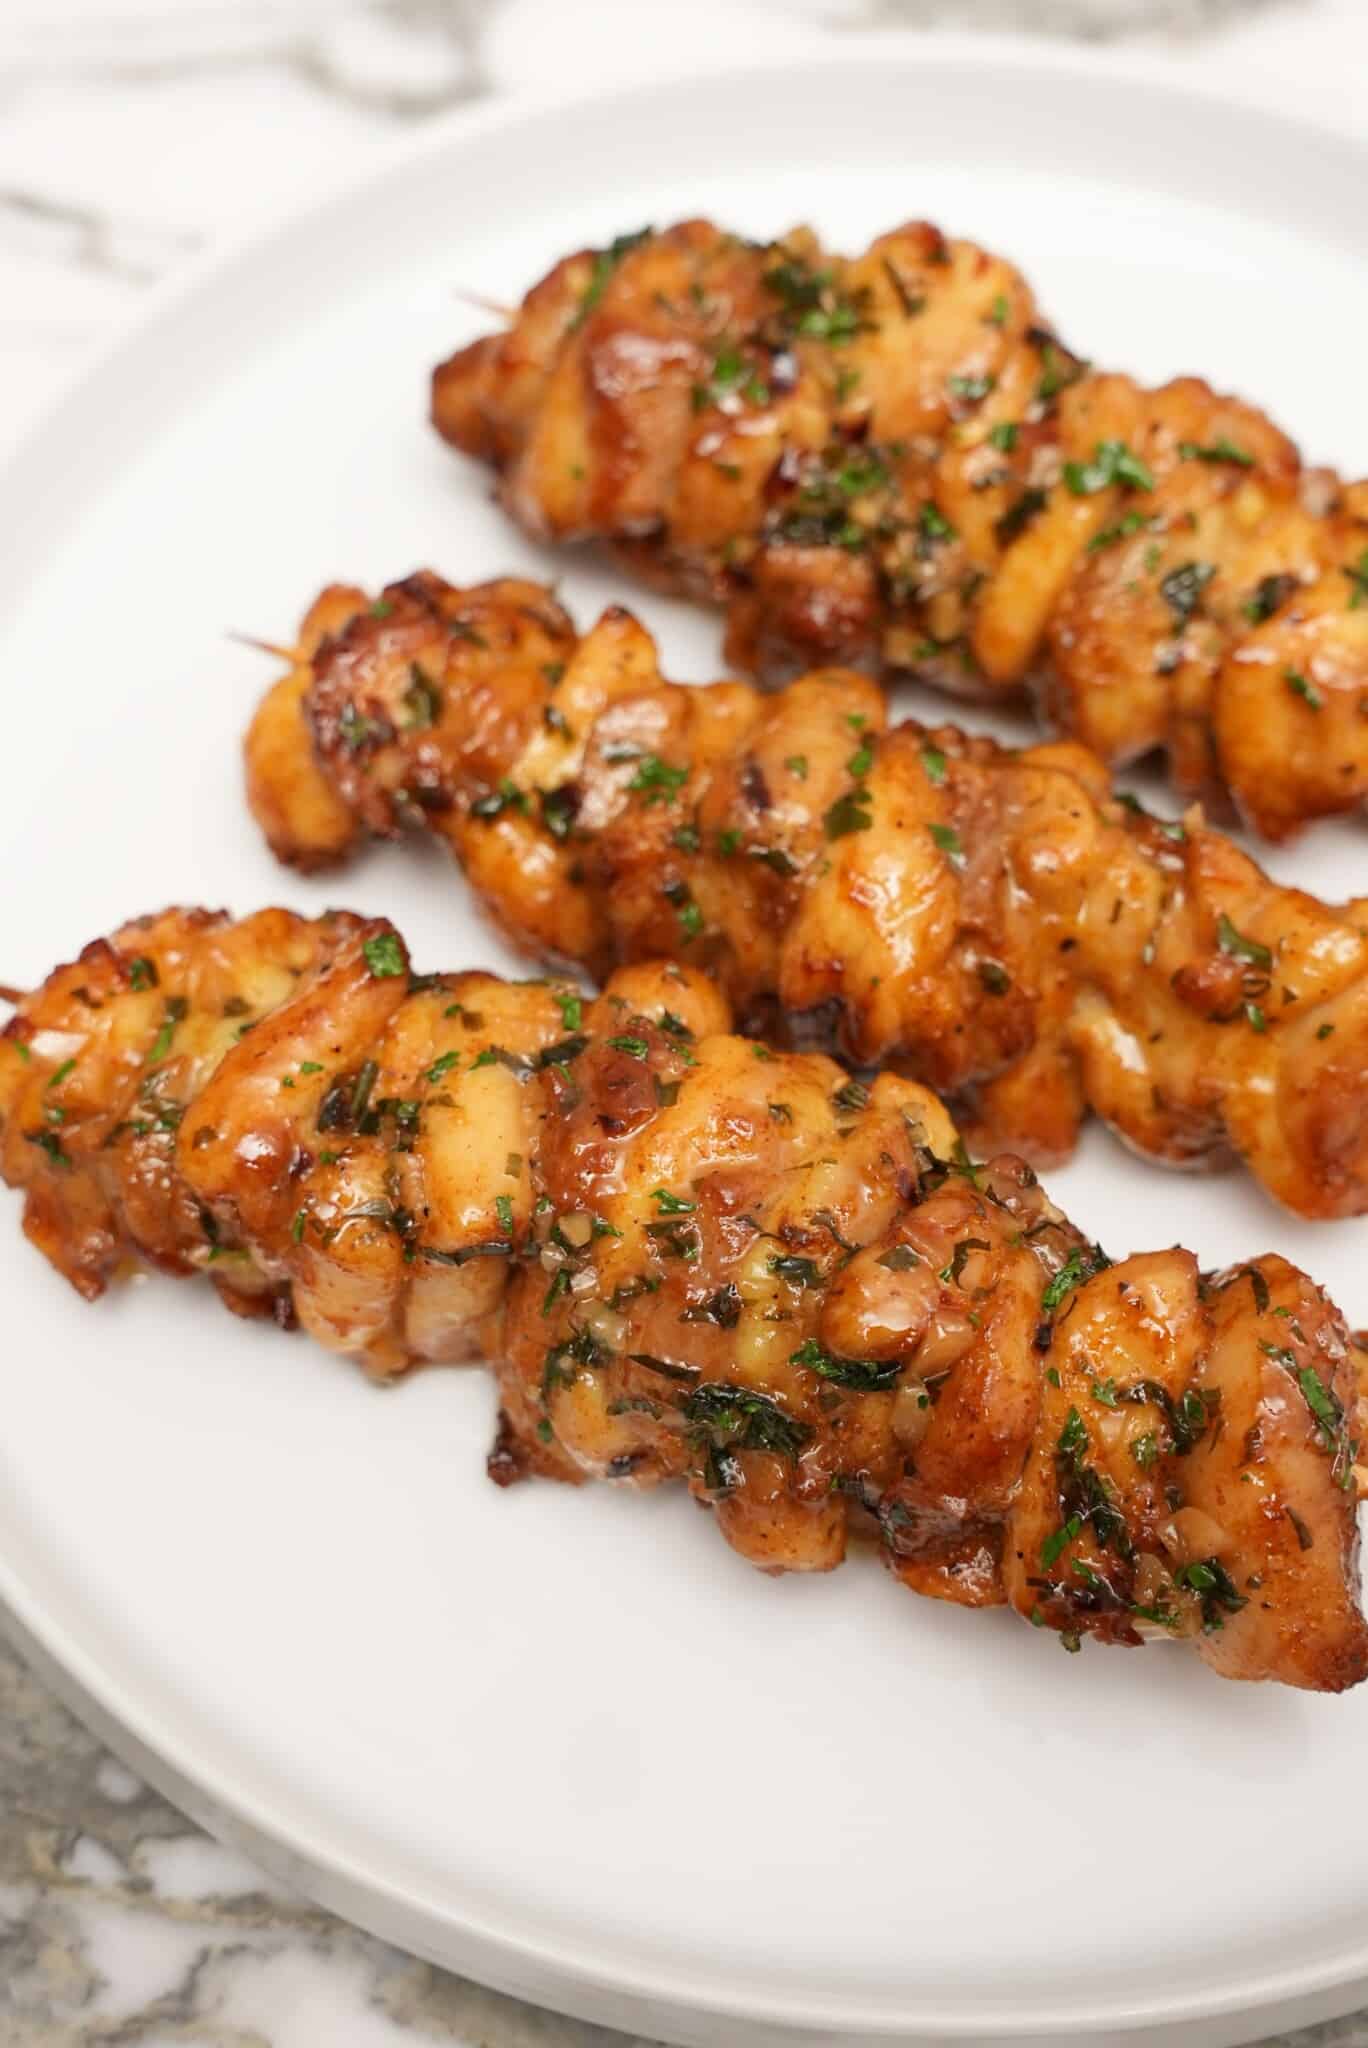 O que significa I want to eat chicken skewers ? - Pergunta sobre